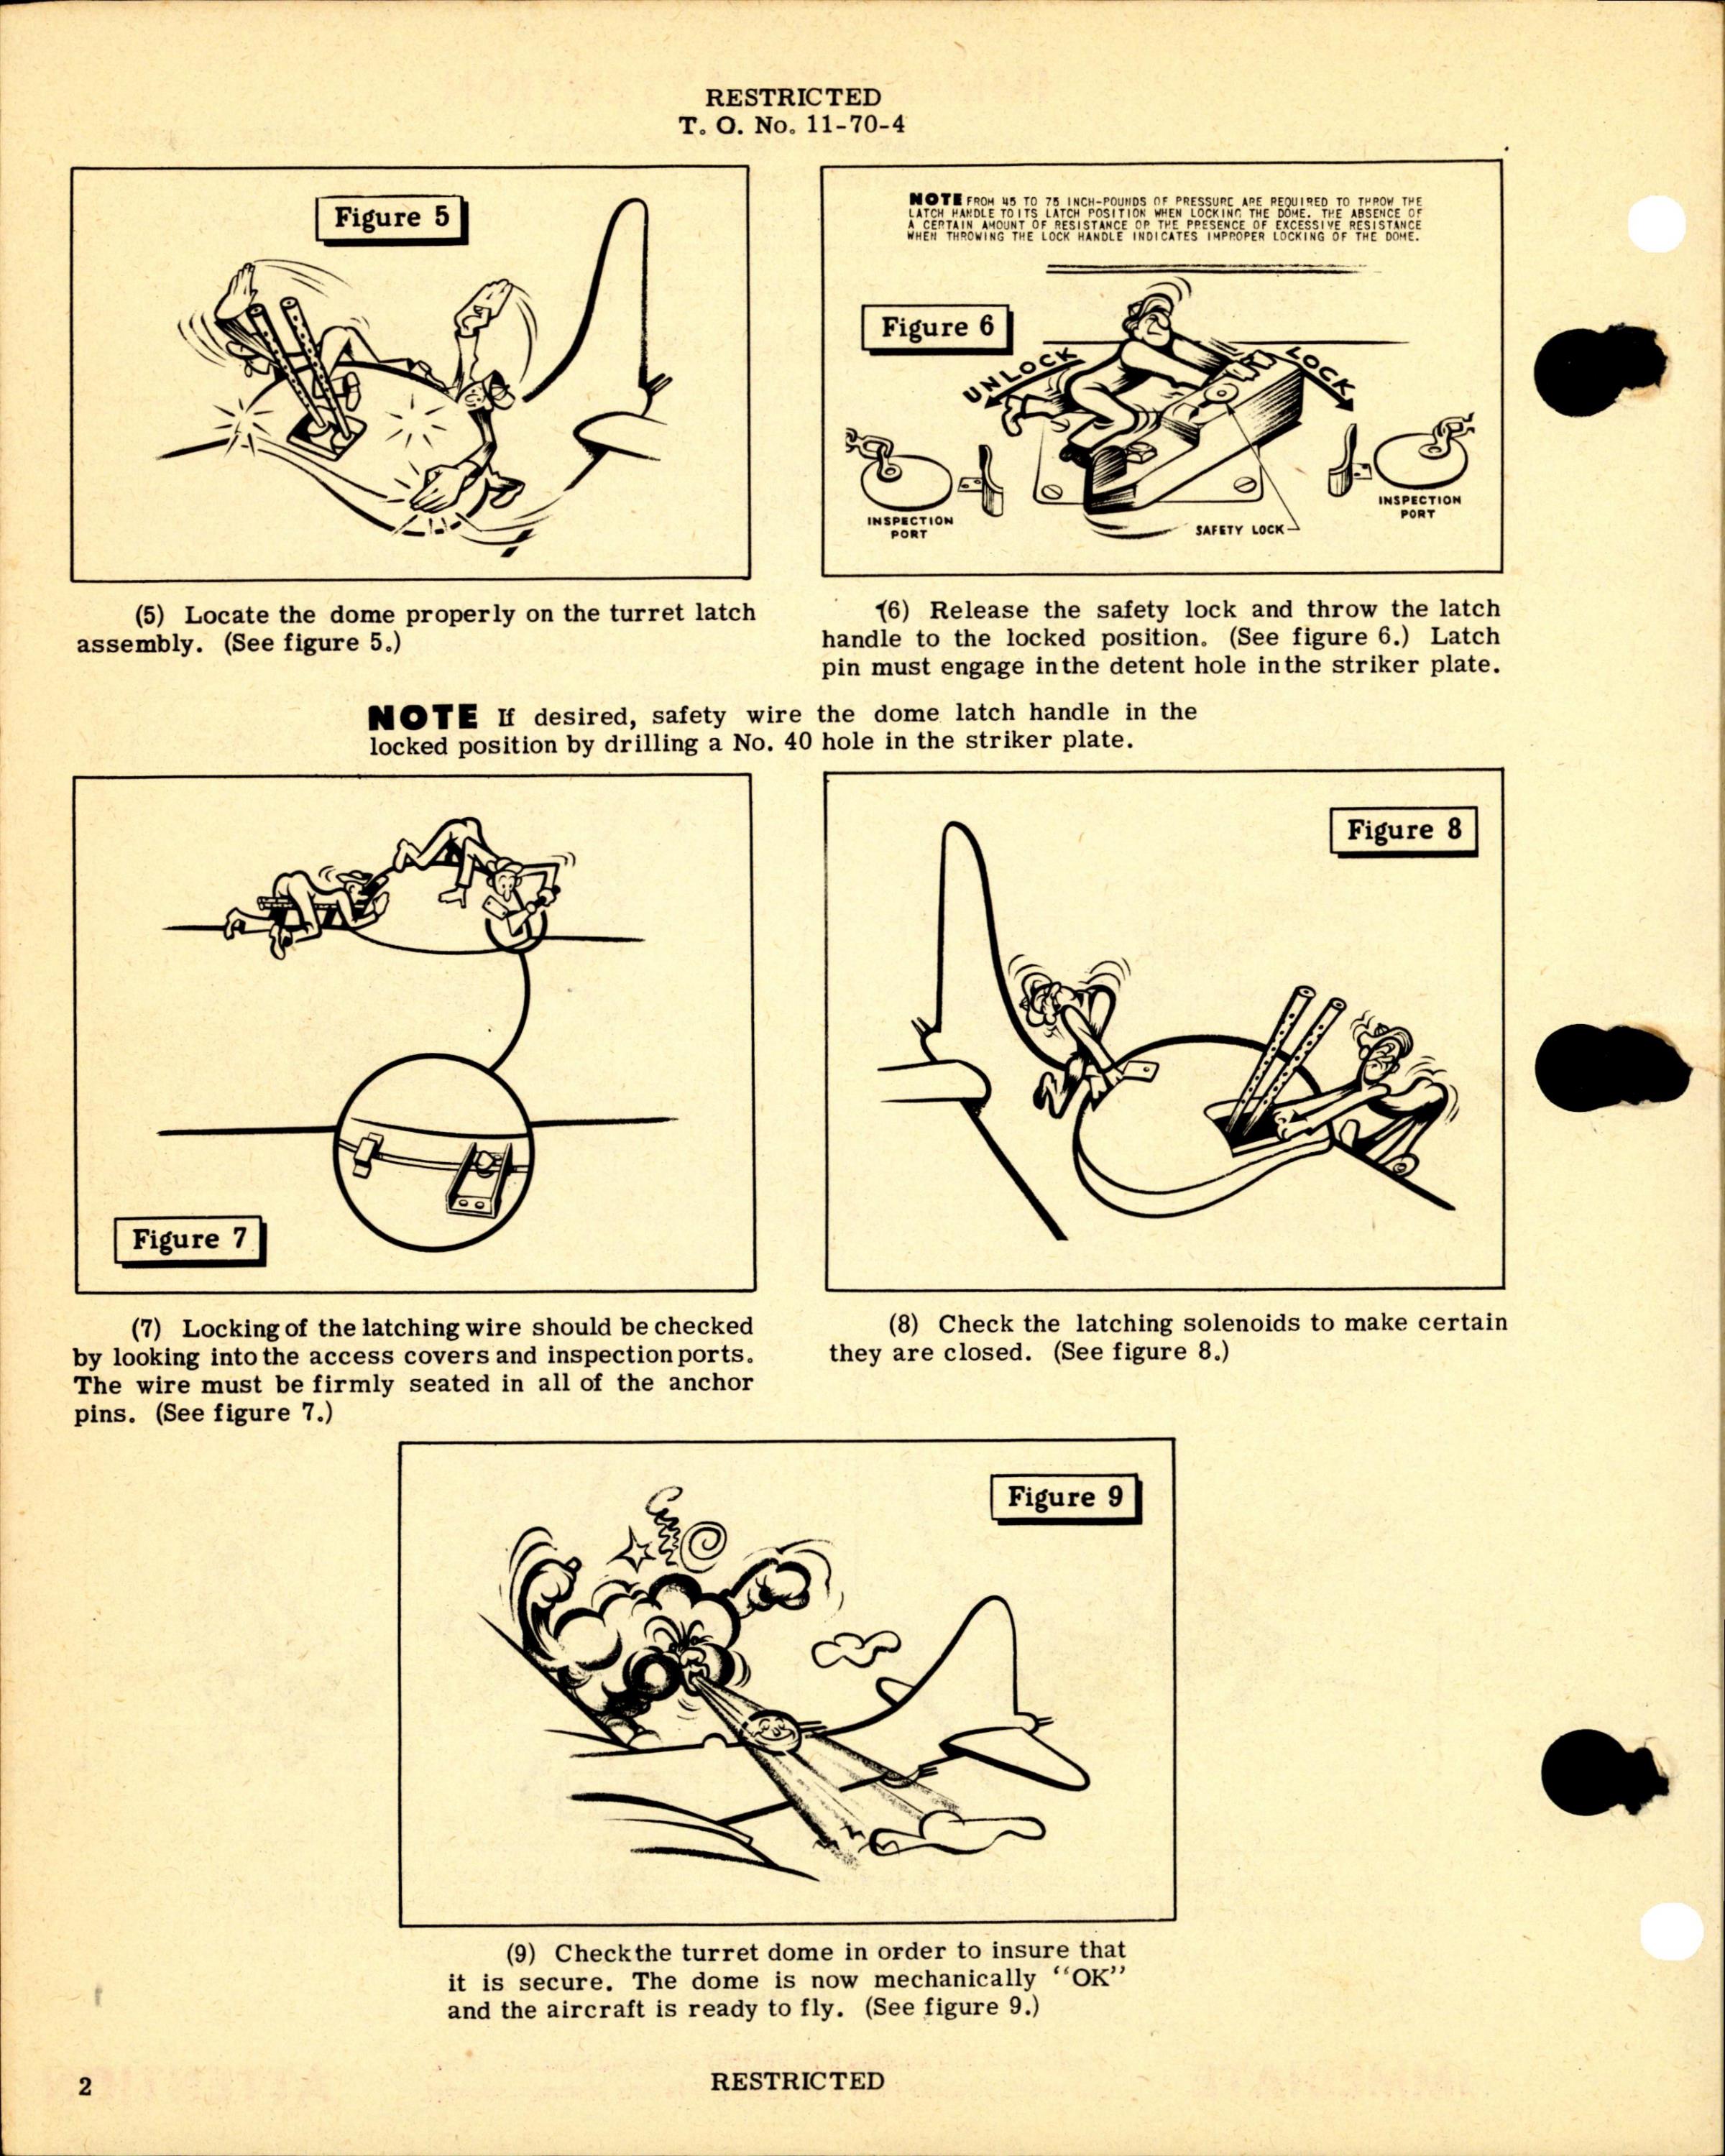 Sample page 2 from AirCorps Library document: Procedure for Installation of Machine Gun Turret Domes